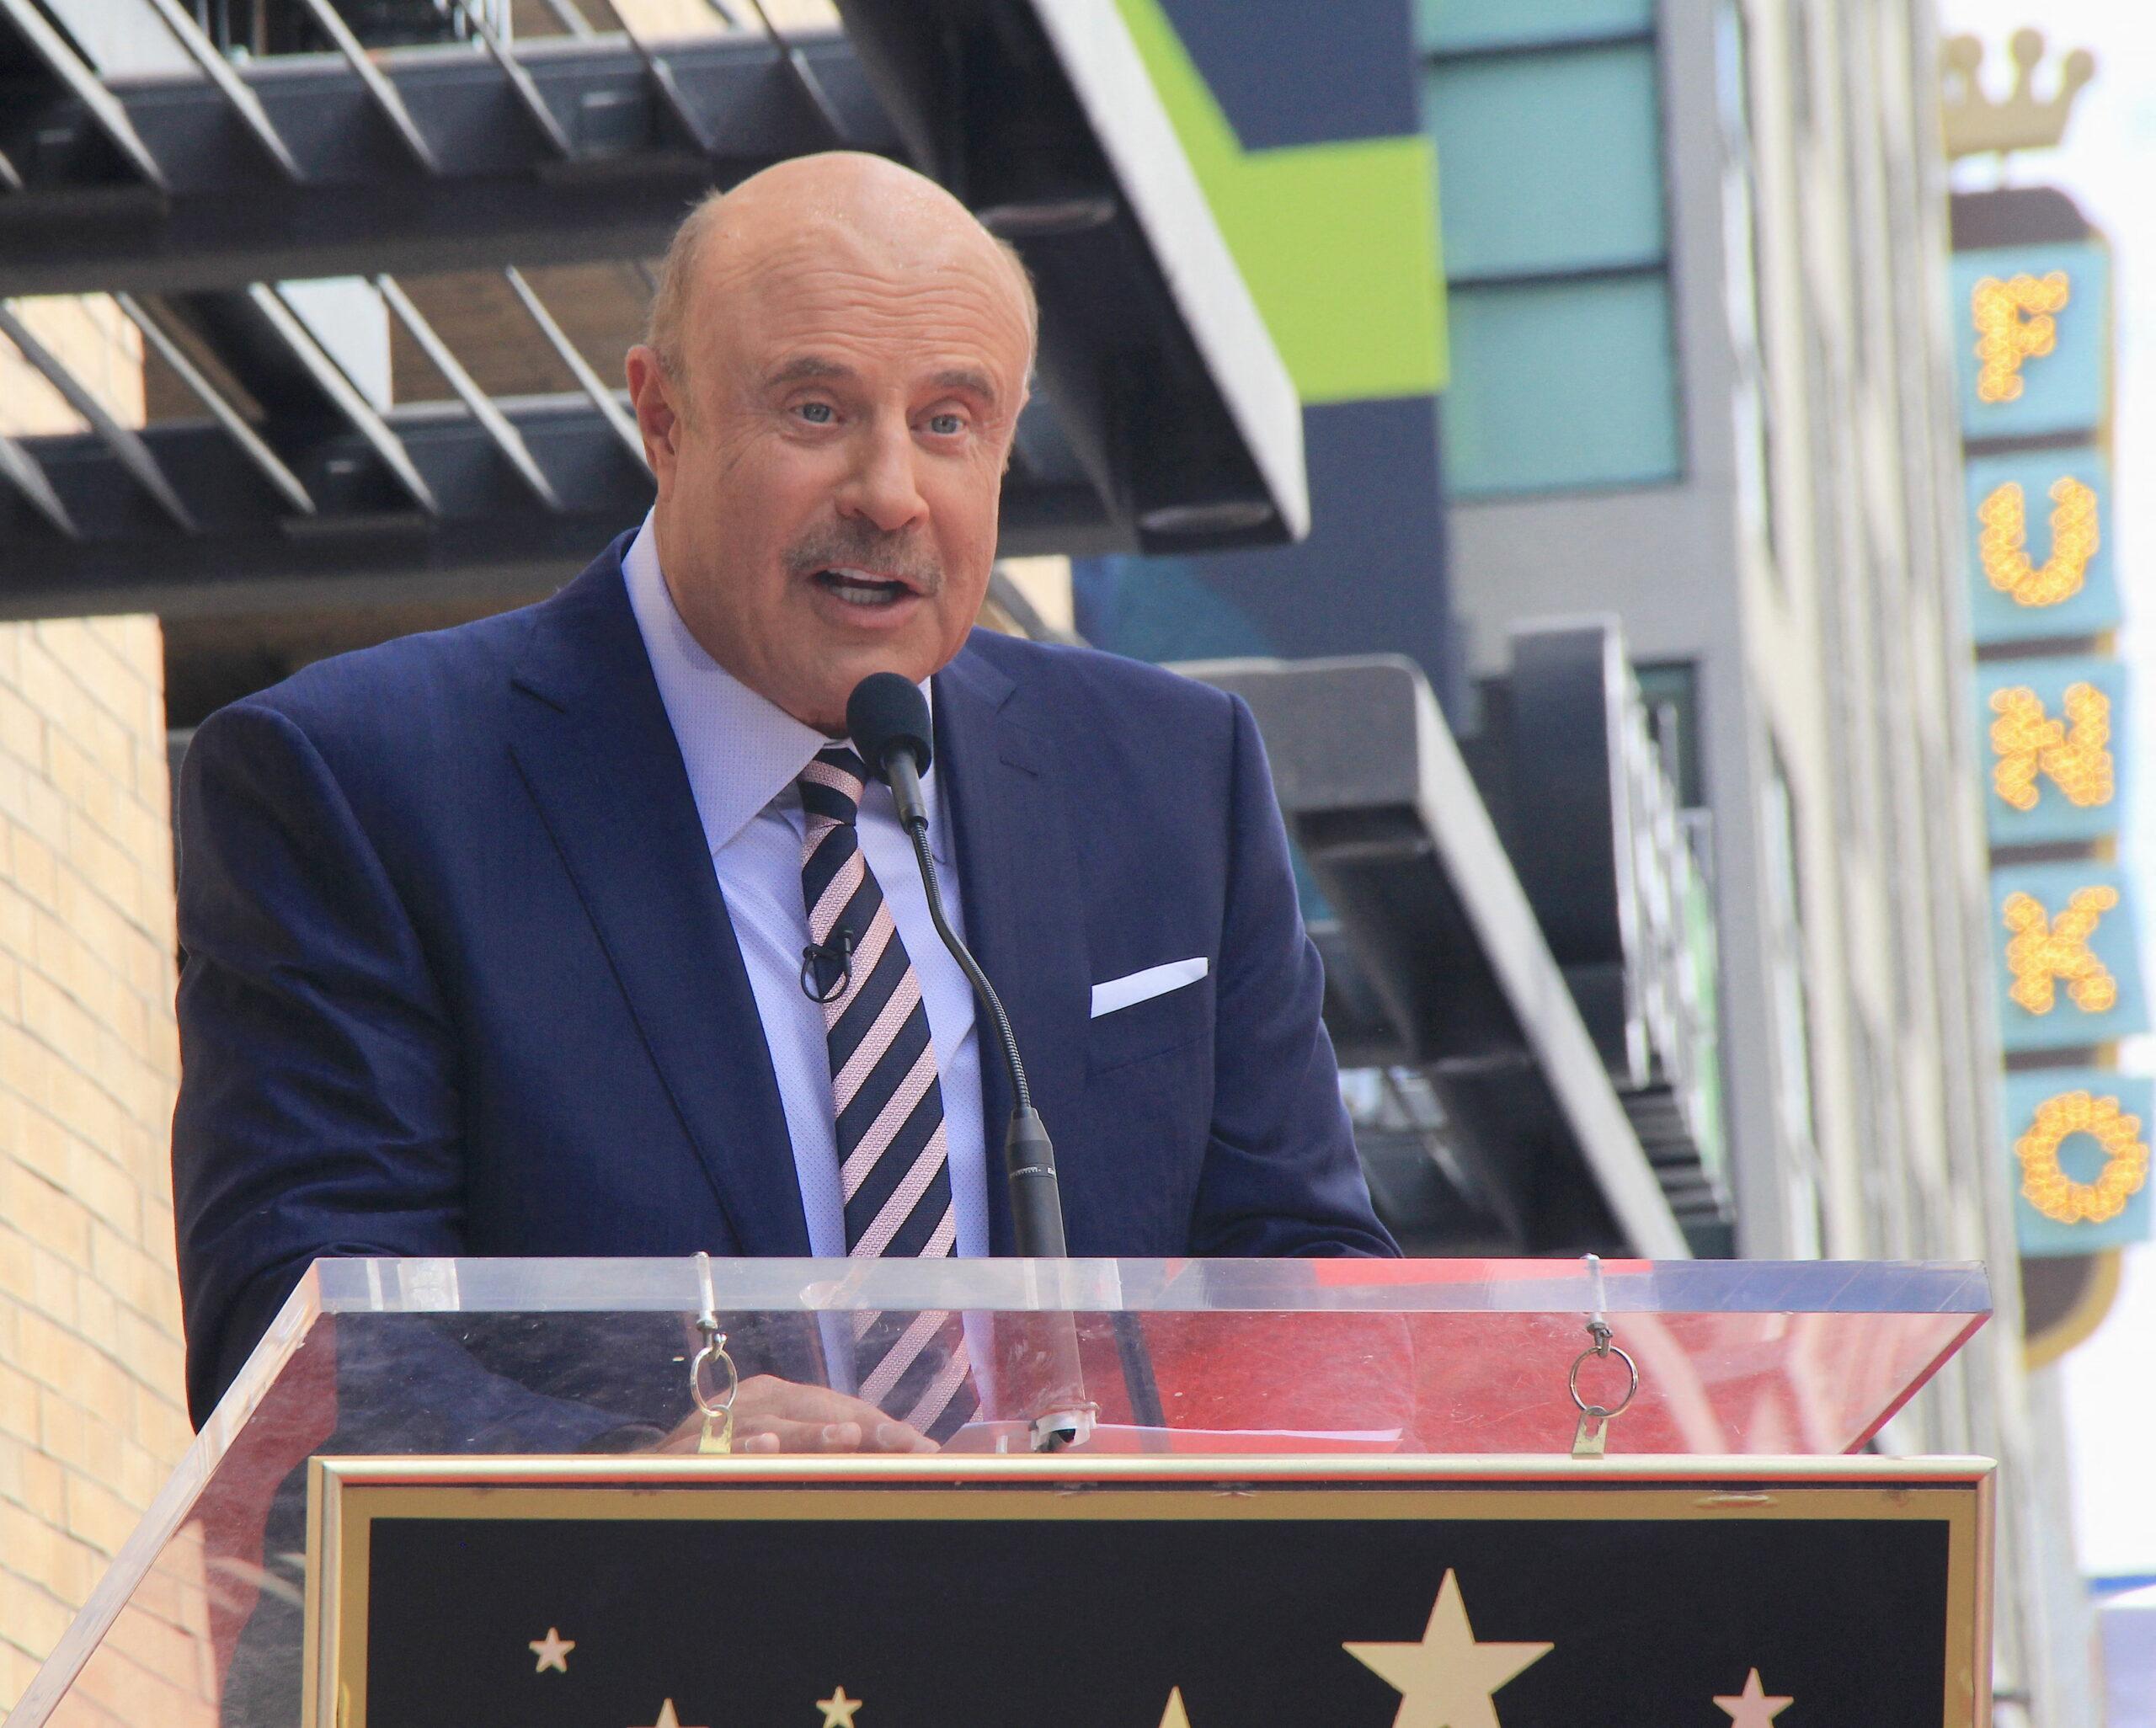 Dr. Phil Sued For Lost Book On Domestic Violence